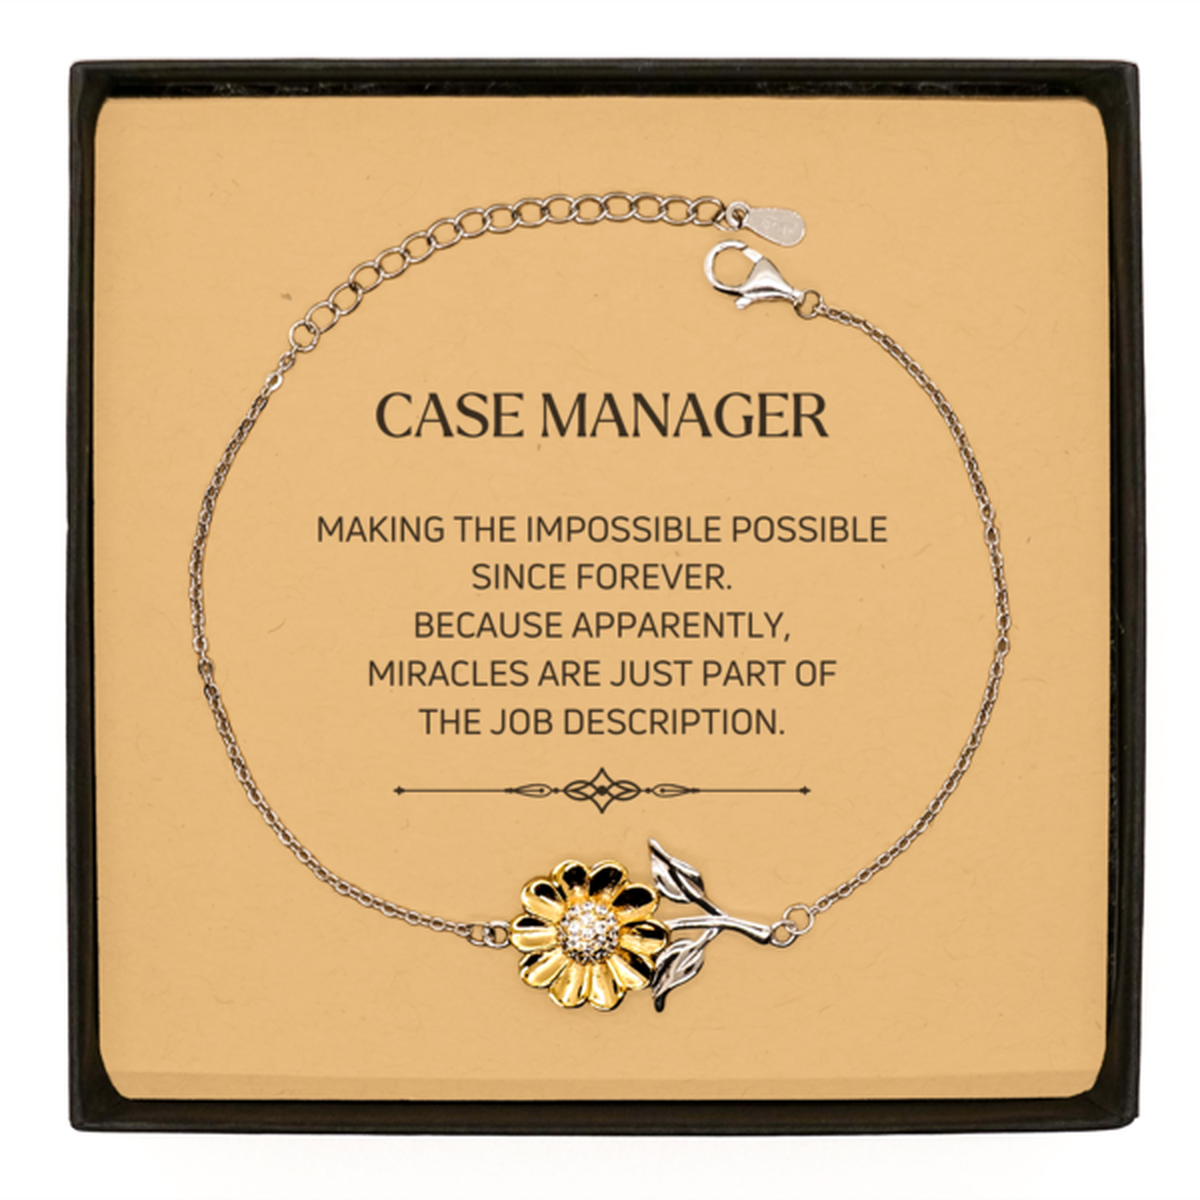 Funny Case Manager Gifts, Miracles are just part of the job description, Inspirational Birthday Sunflower Bracelet For Case Manager, Men, Women, Coworkers, Friends, Boss